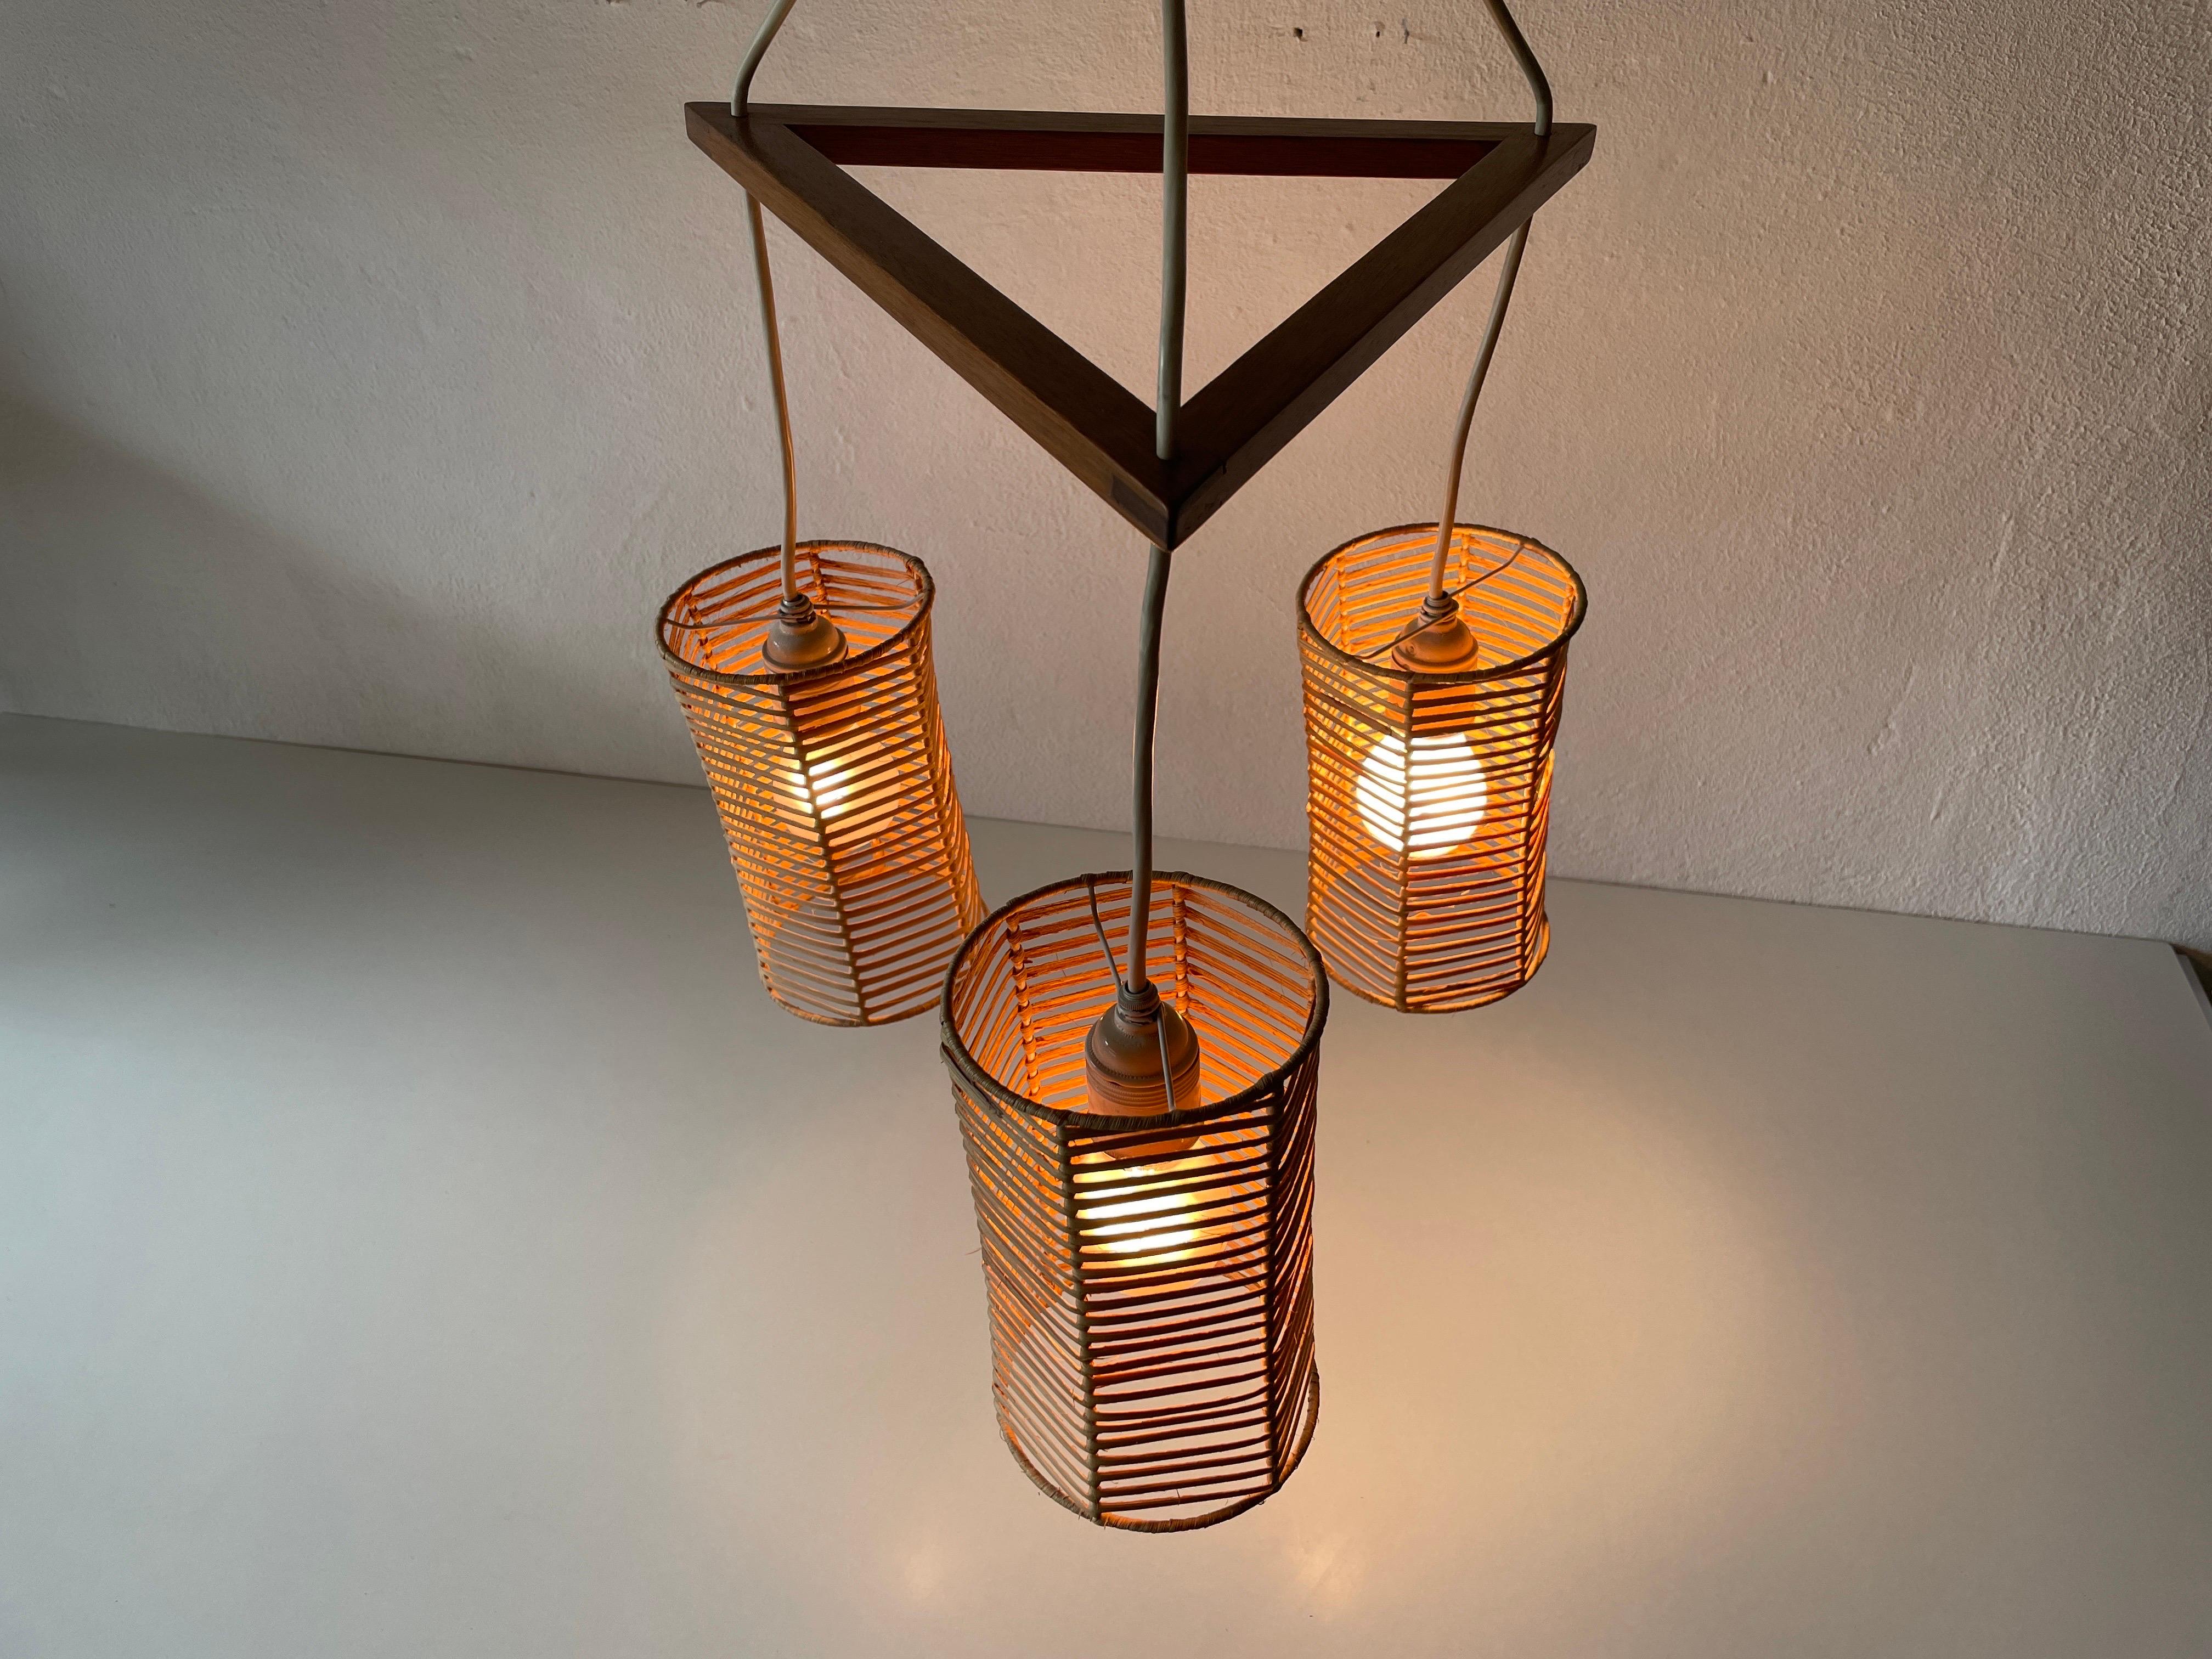 Triple Shade Wicker and Wood Pendant Lamp, 1960s, Germany For Sale 11